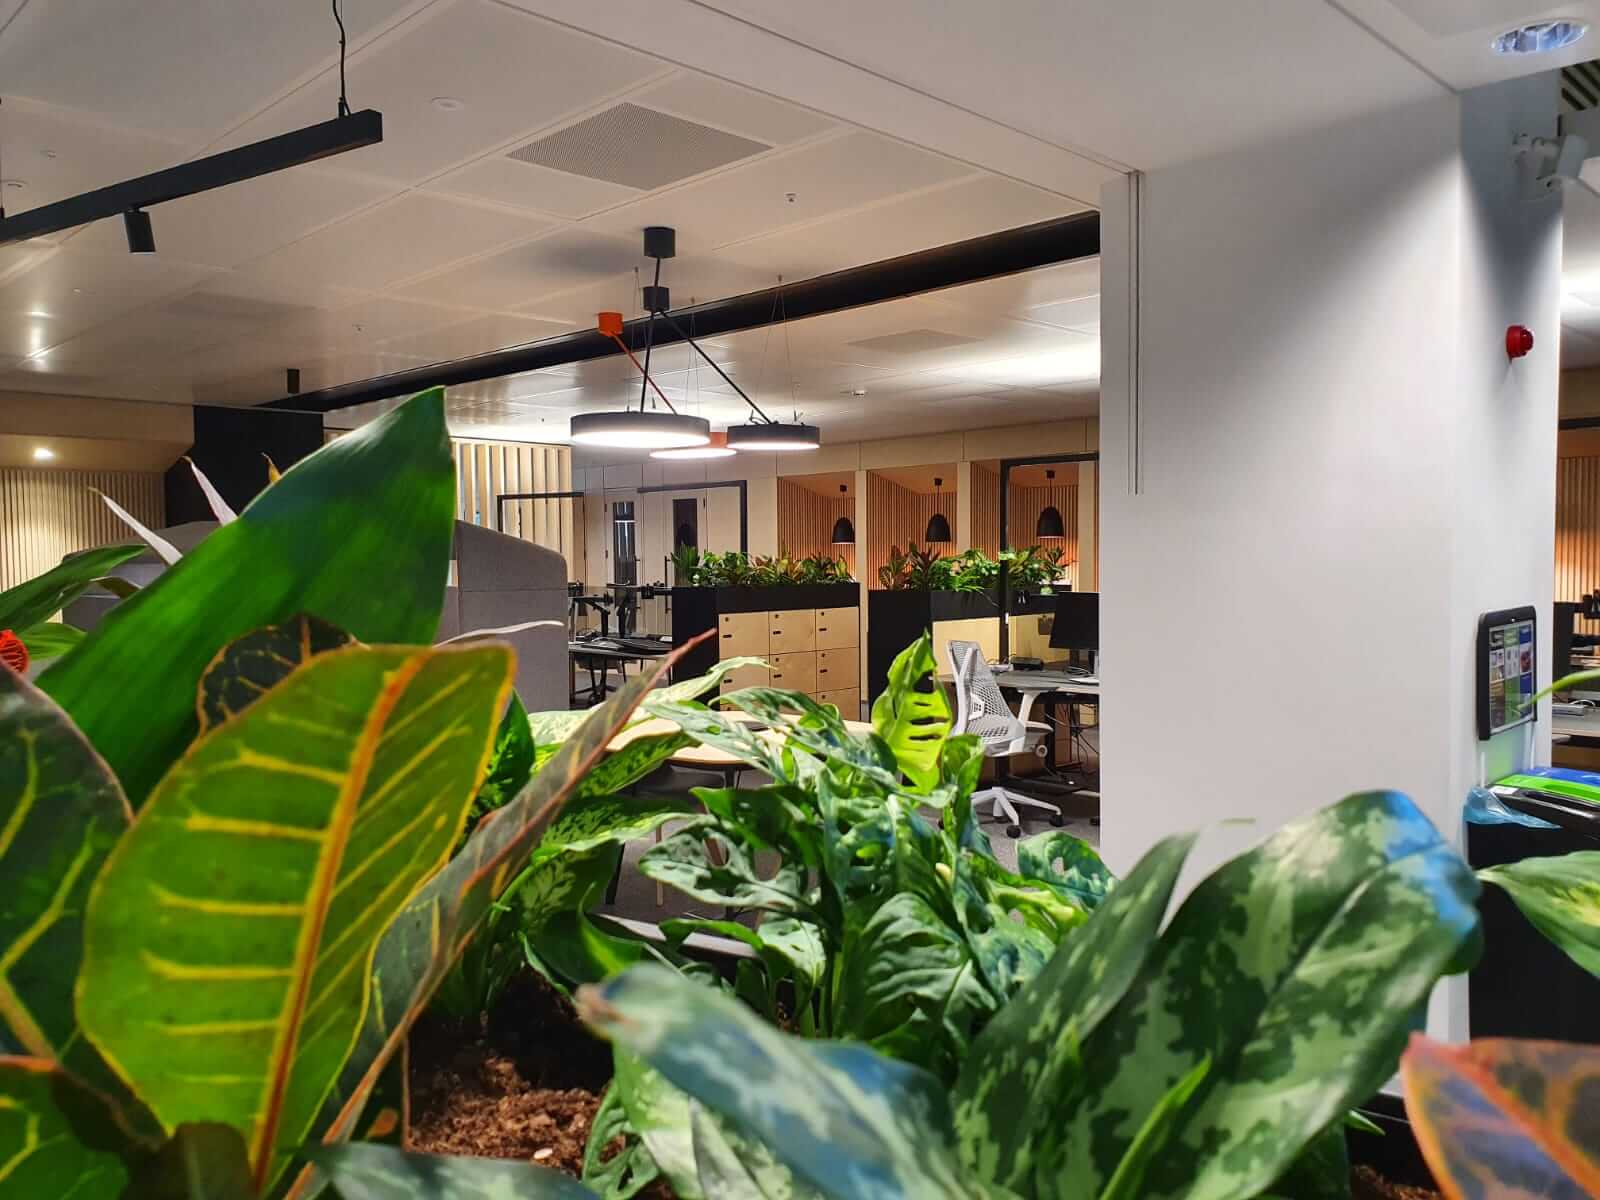 communal office area with plants